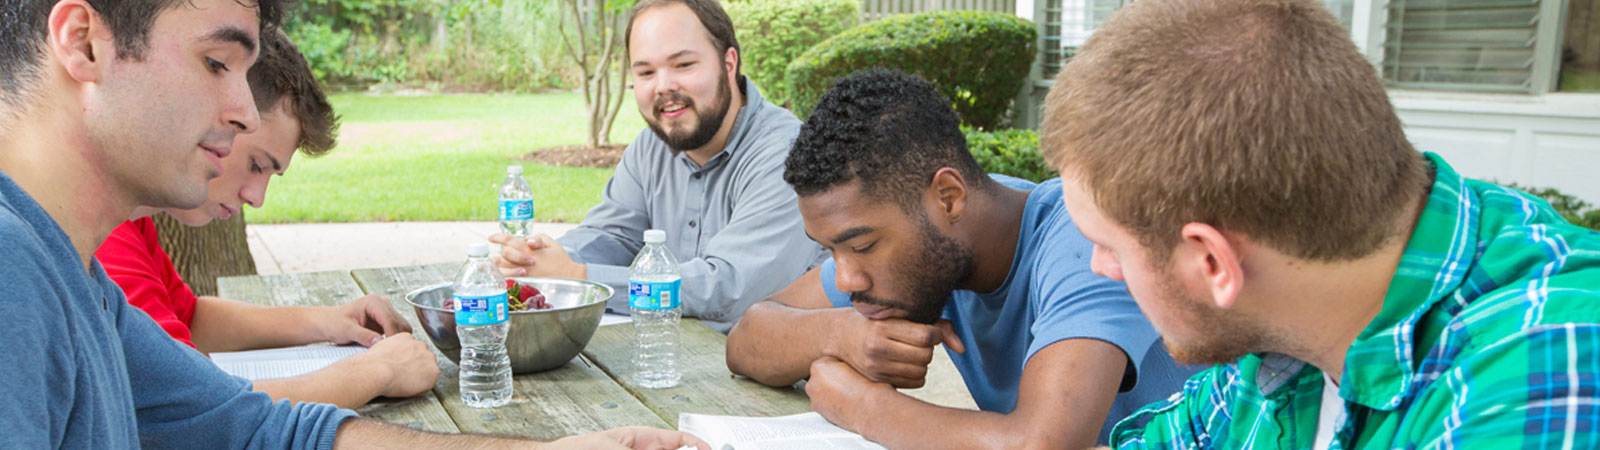 Rosecrance recovery students studying outside